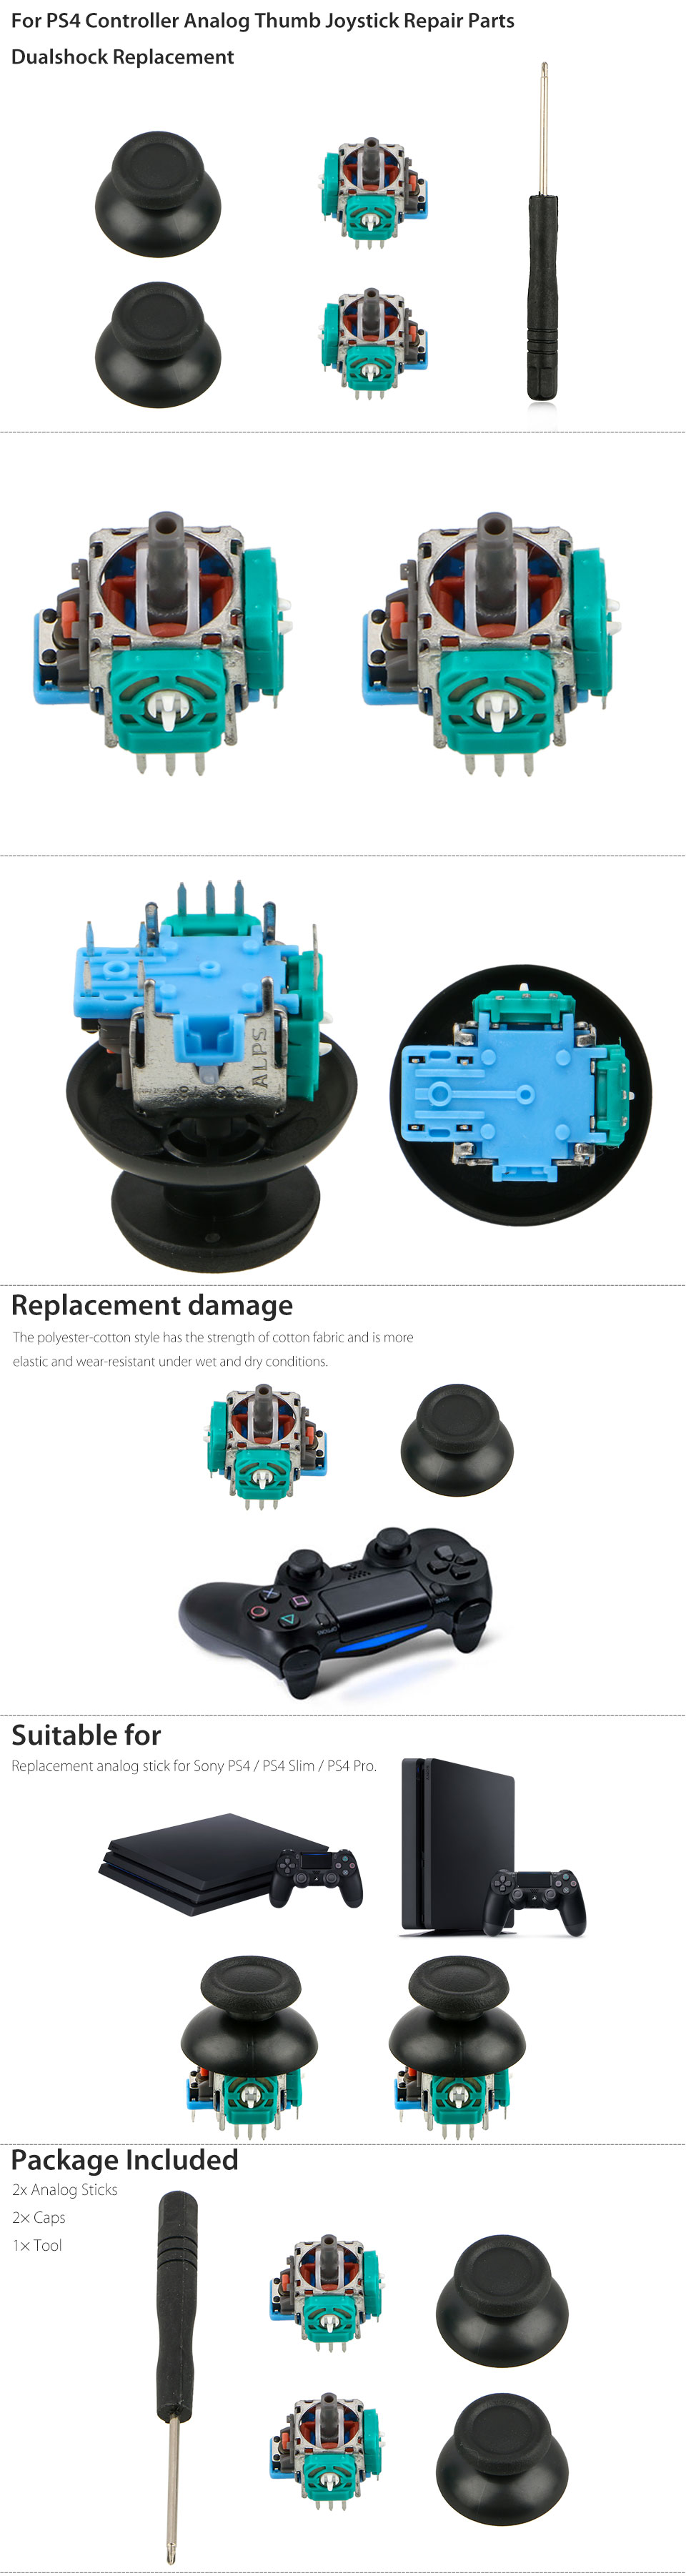 ps4 controller parts